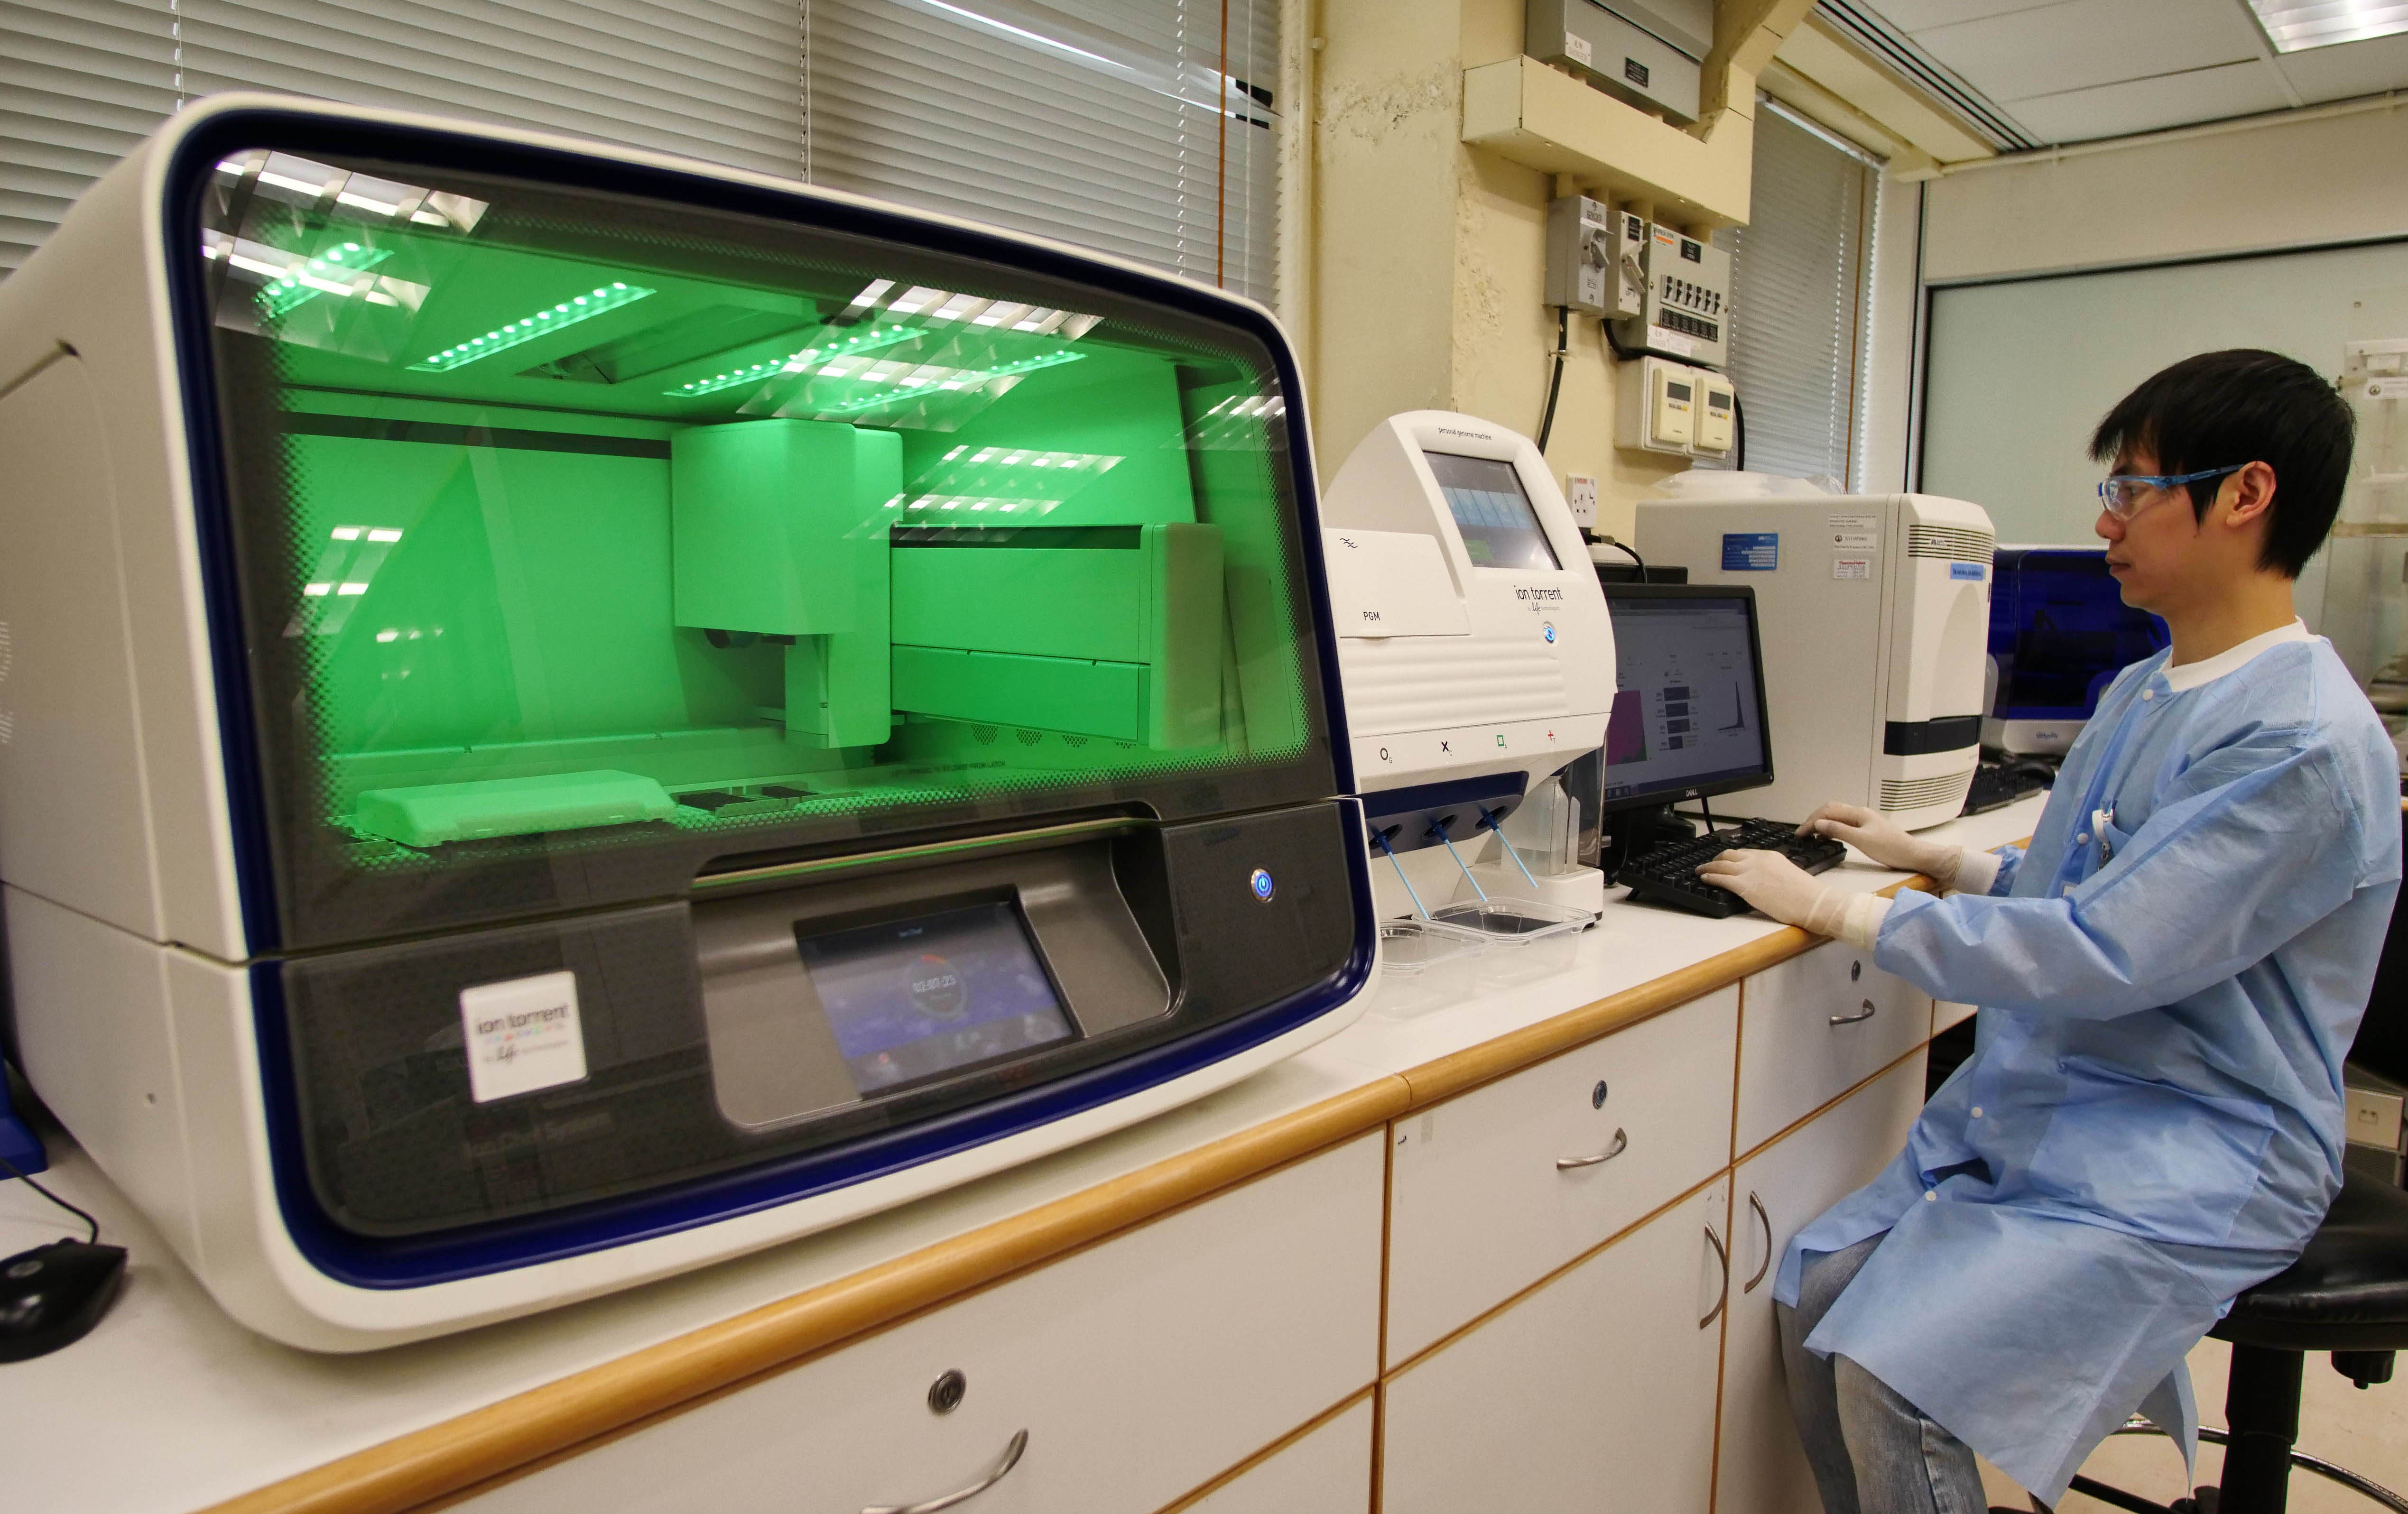 A staff is operating the next-generation DNA sequencing system